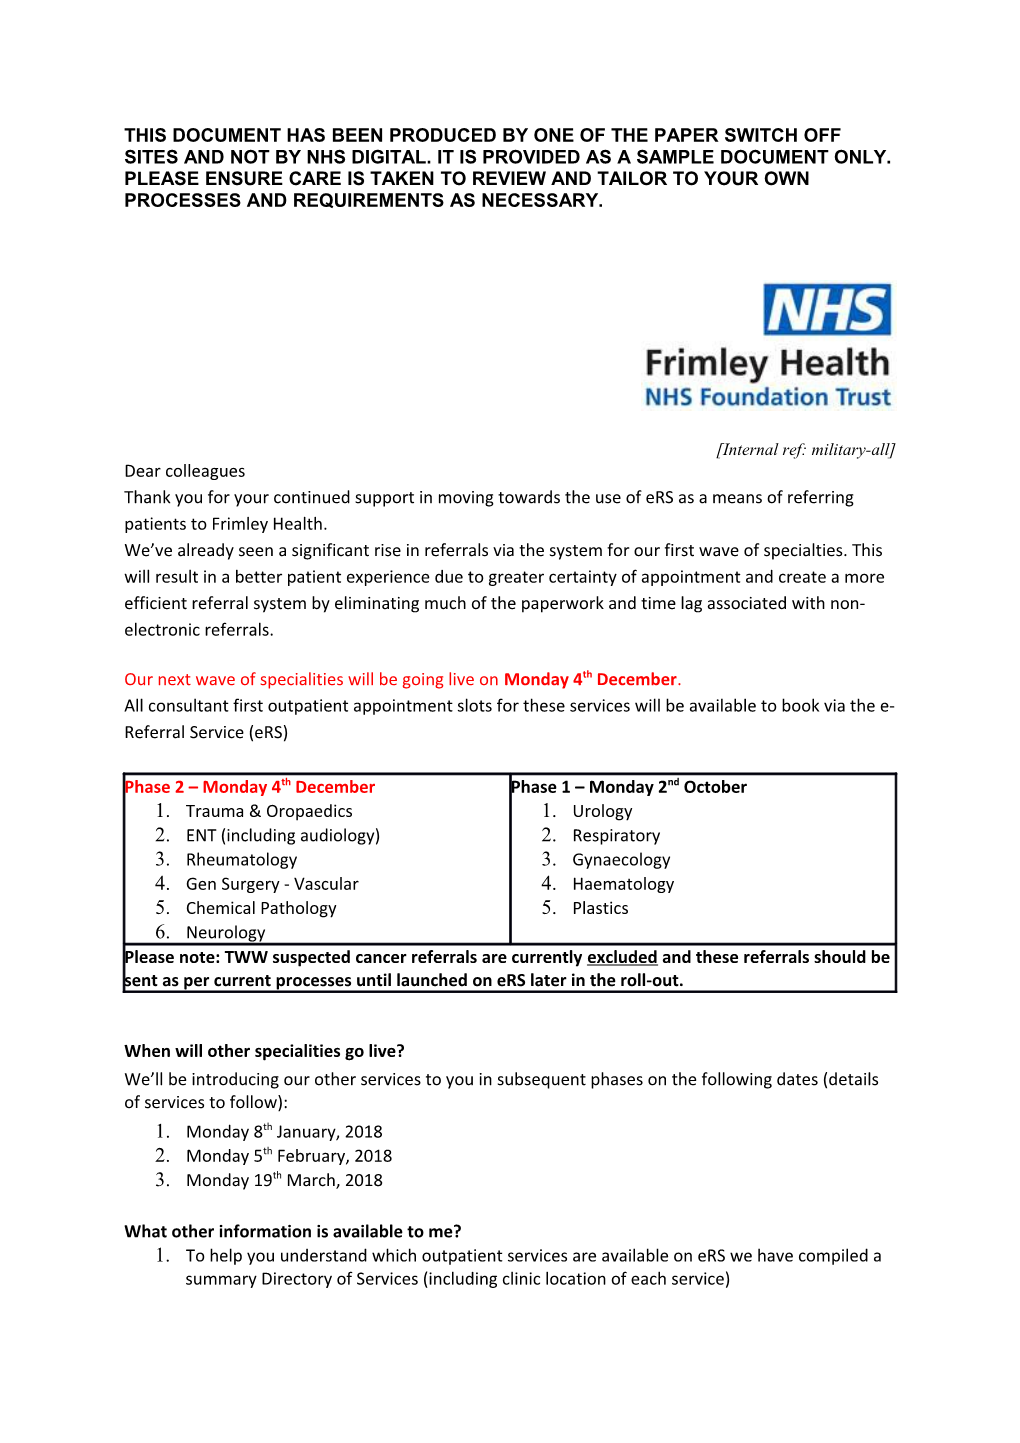 This Document Has Been Produced by One of the Paper Switch Off Sites and Not by Nhs Digital